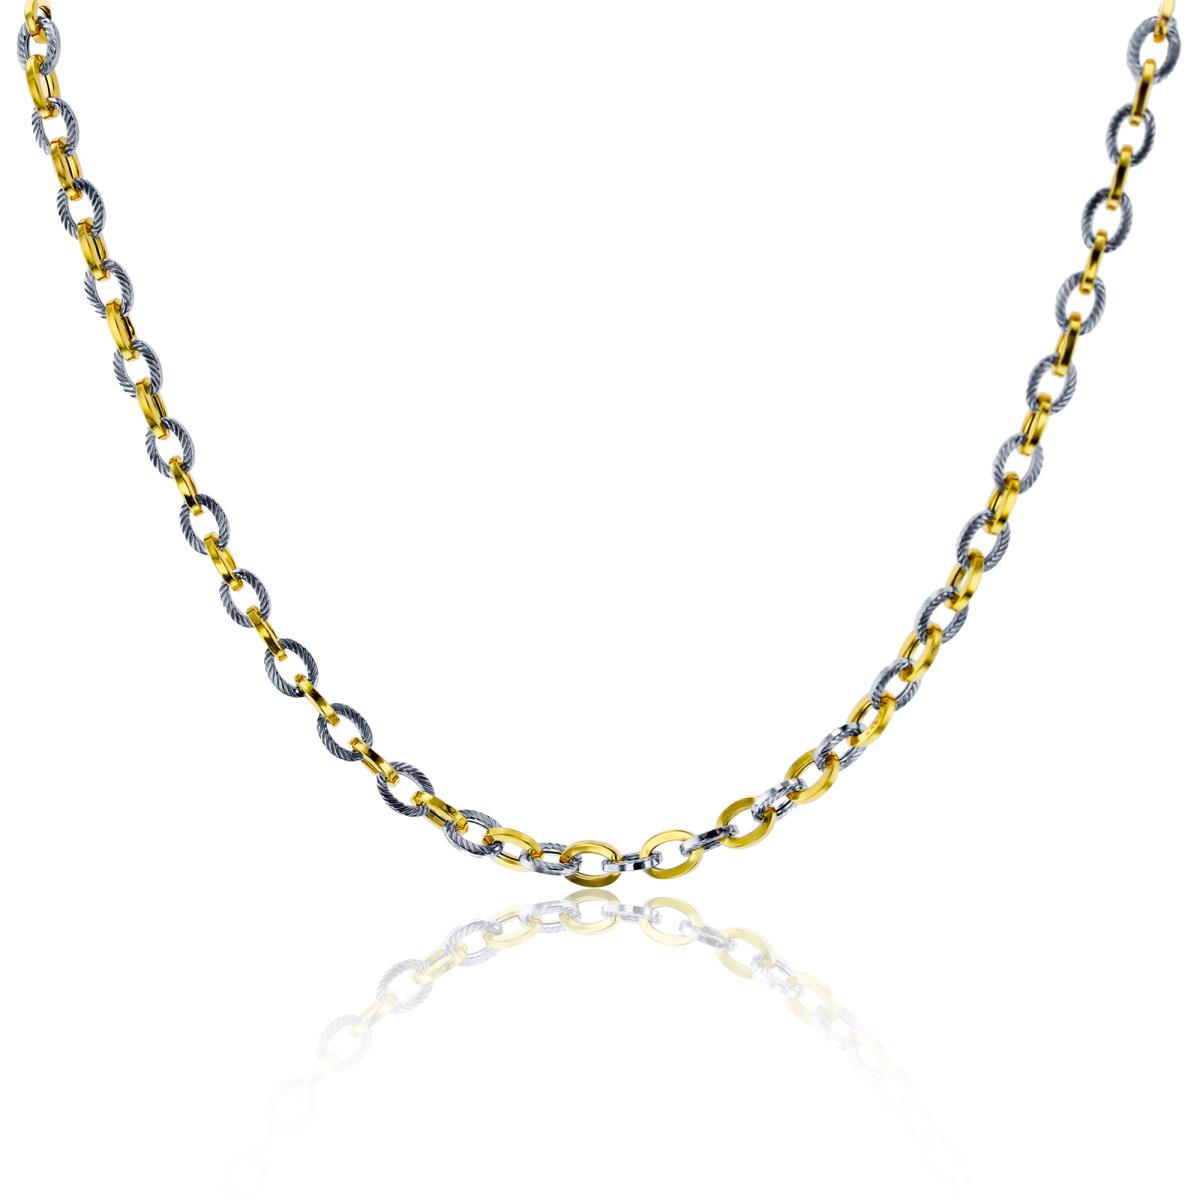 10K Two-Tone Gold Alternate Polished & Textured Open Oval Linked Italian 18"ext Necklace